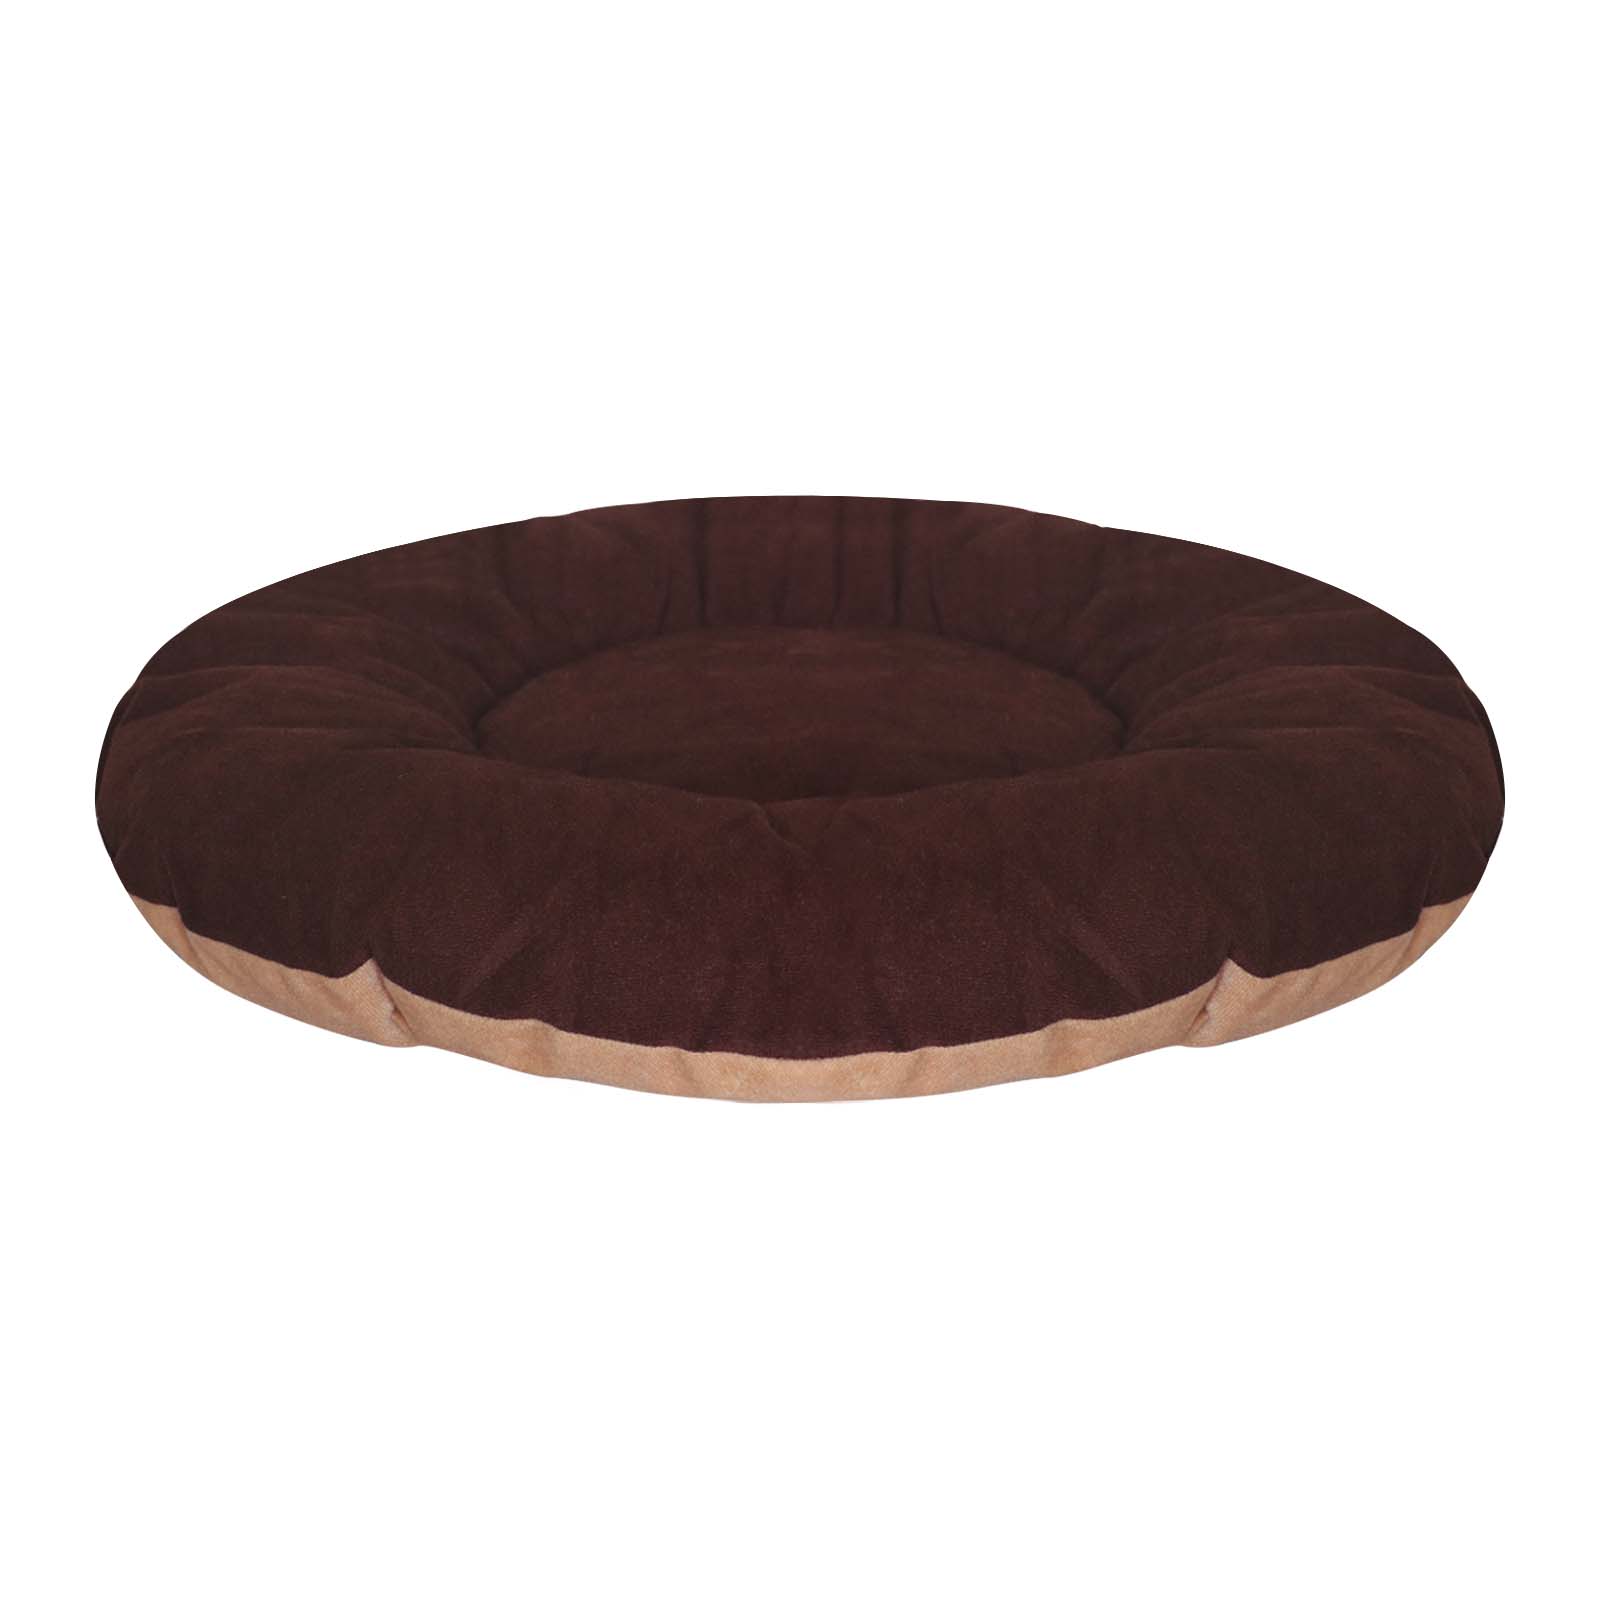 Hiputee Reversible Flat Velvet Round Shape Cushion for Dogs and Cats (Brown & Cream)